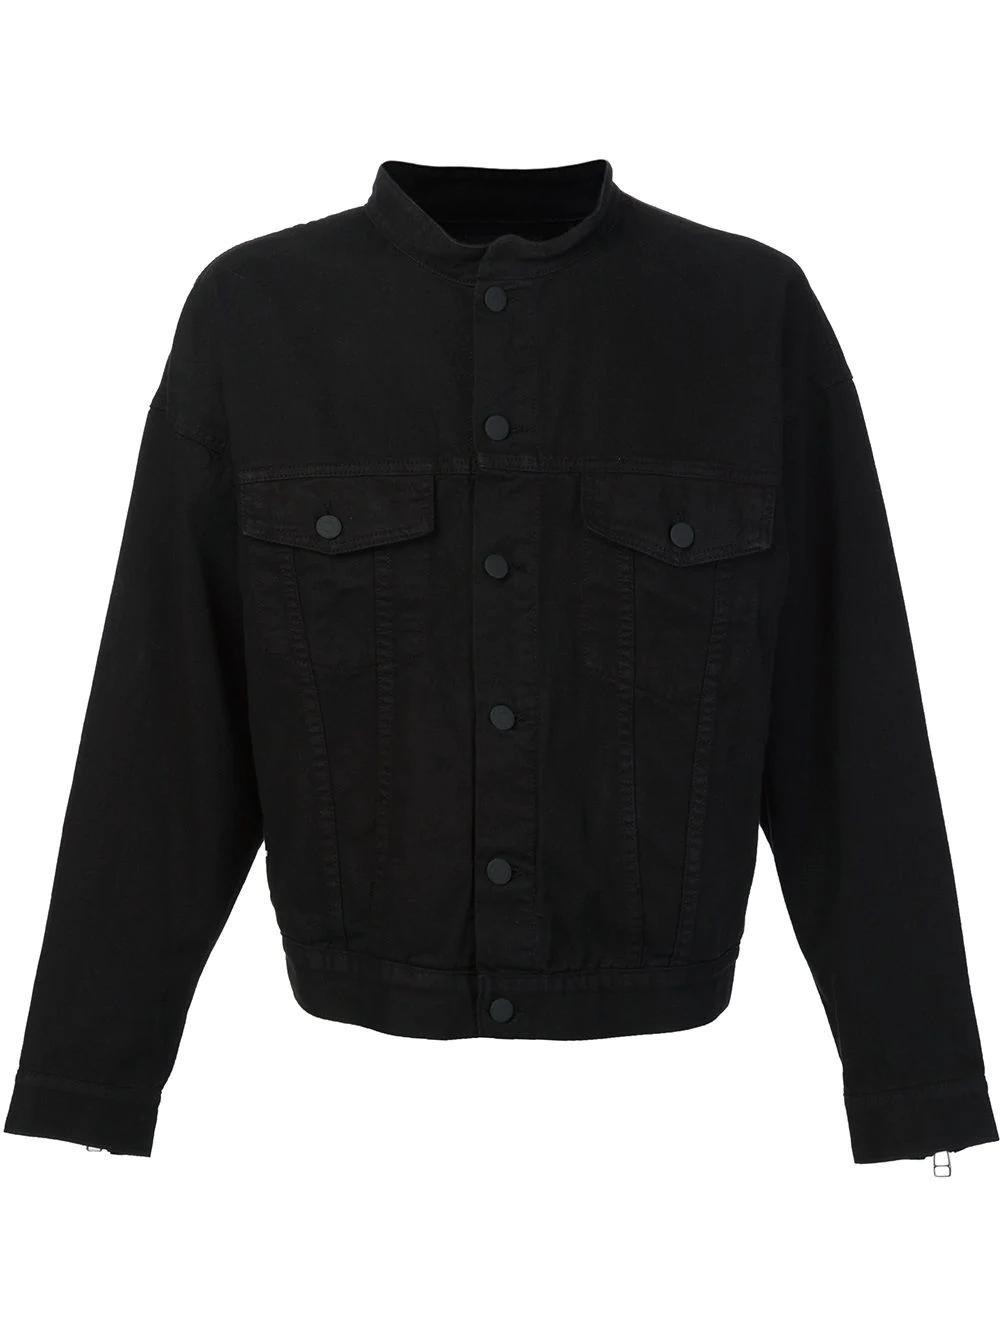 collarless buttoned jacket by DANIEL PATRICK